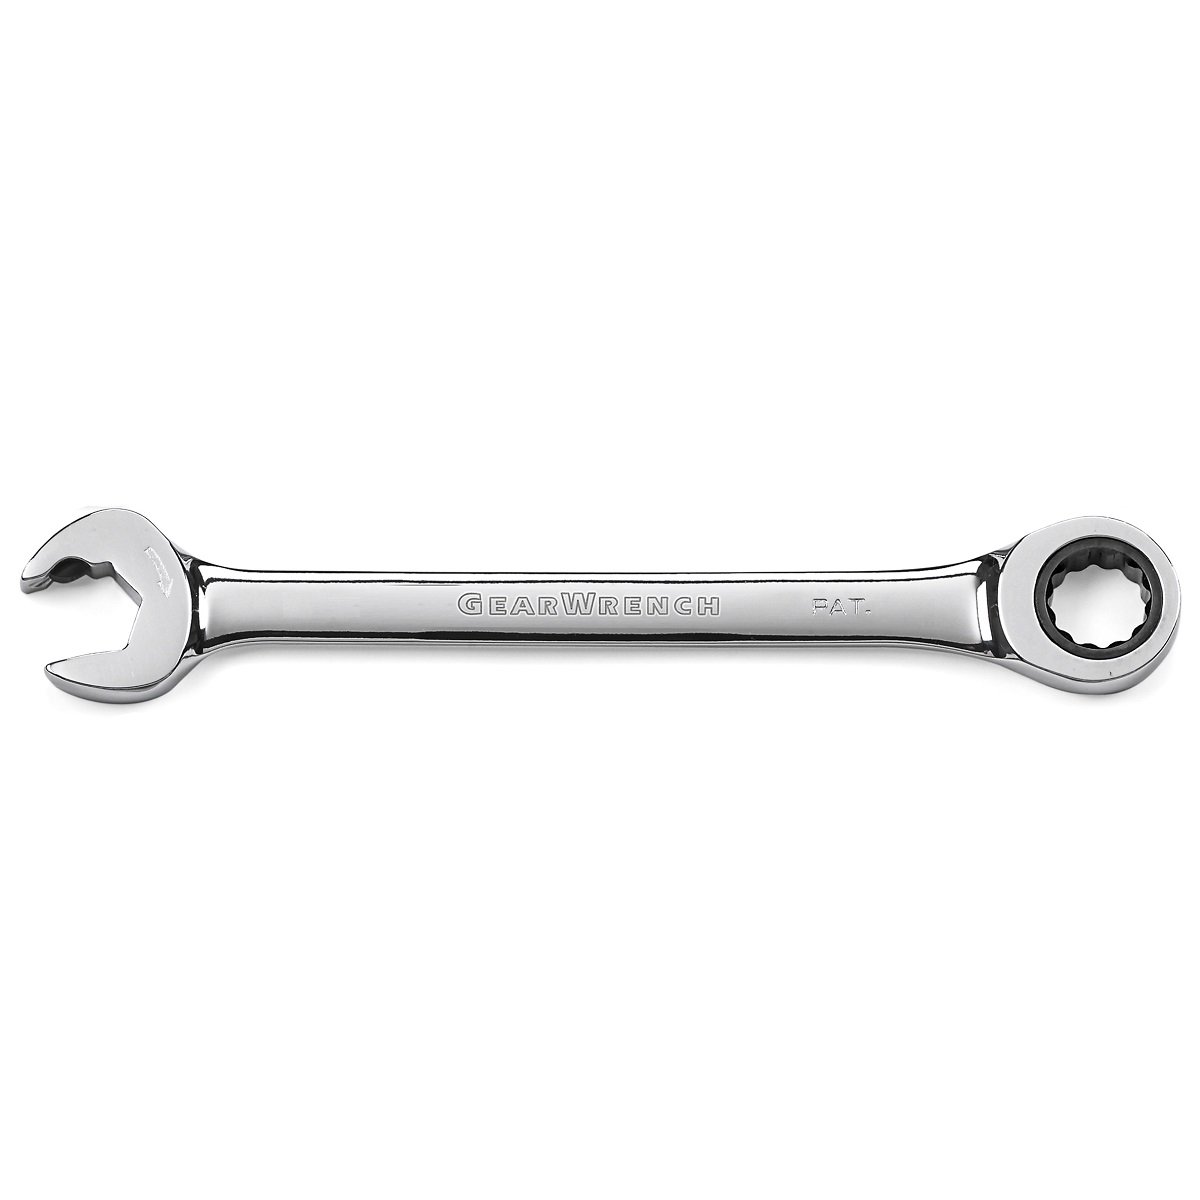 GearWrench Ratcheting Open End Combination Spanner Wrench 16mm 85516